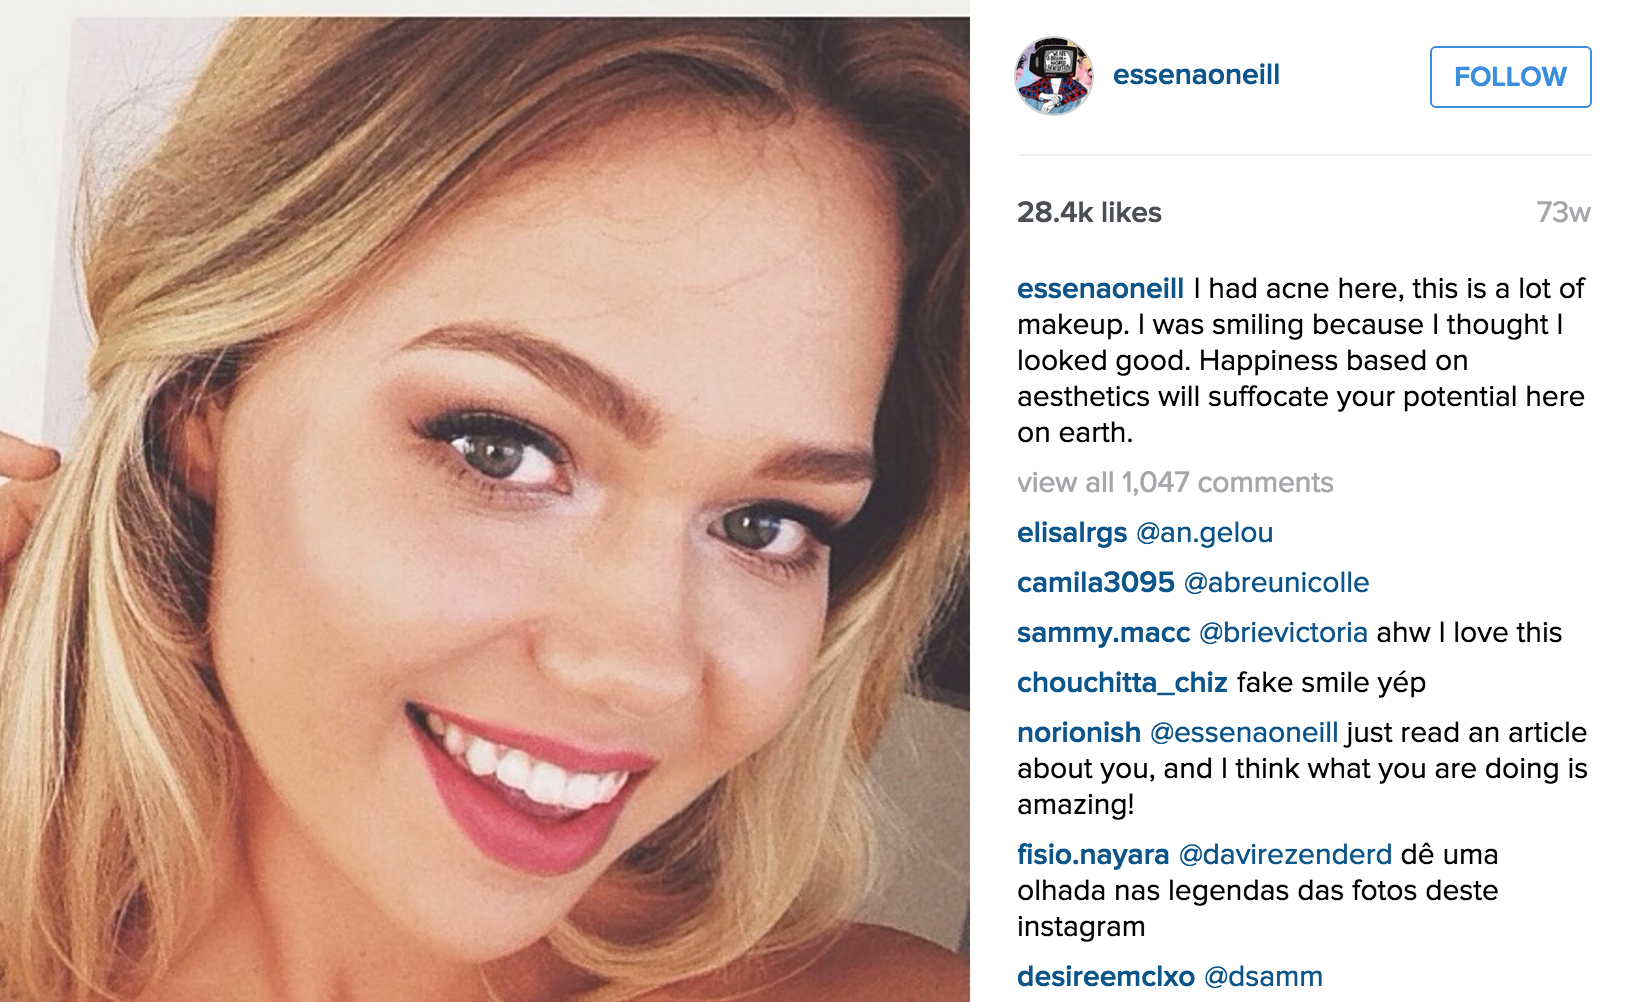 18 Year Old Instagram Star Reveals Dark Side Of Social Media The Mary Sue